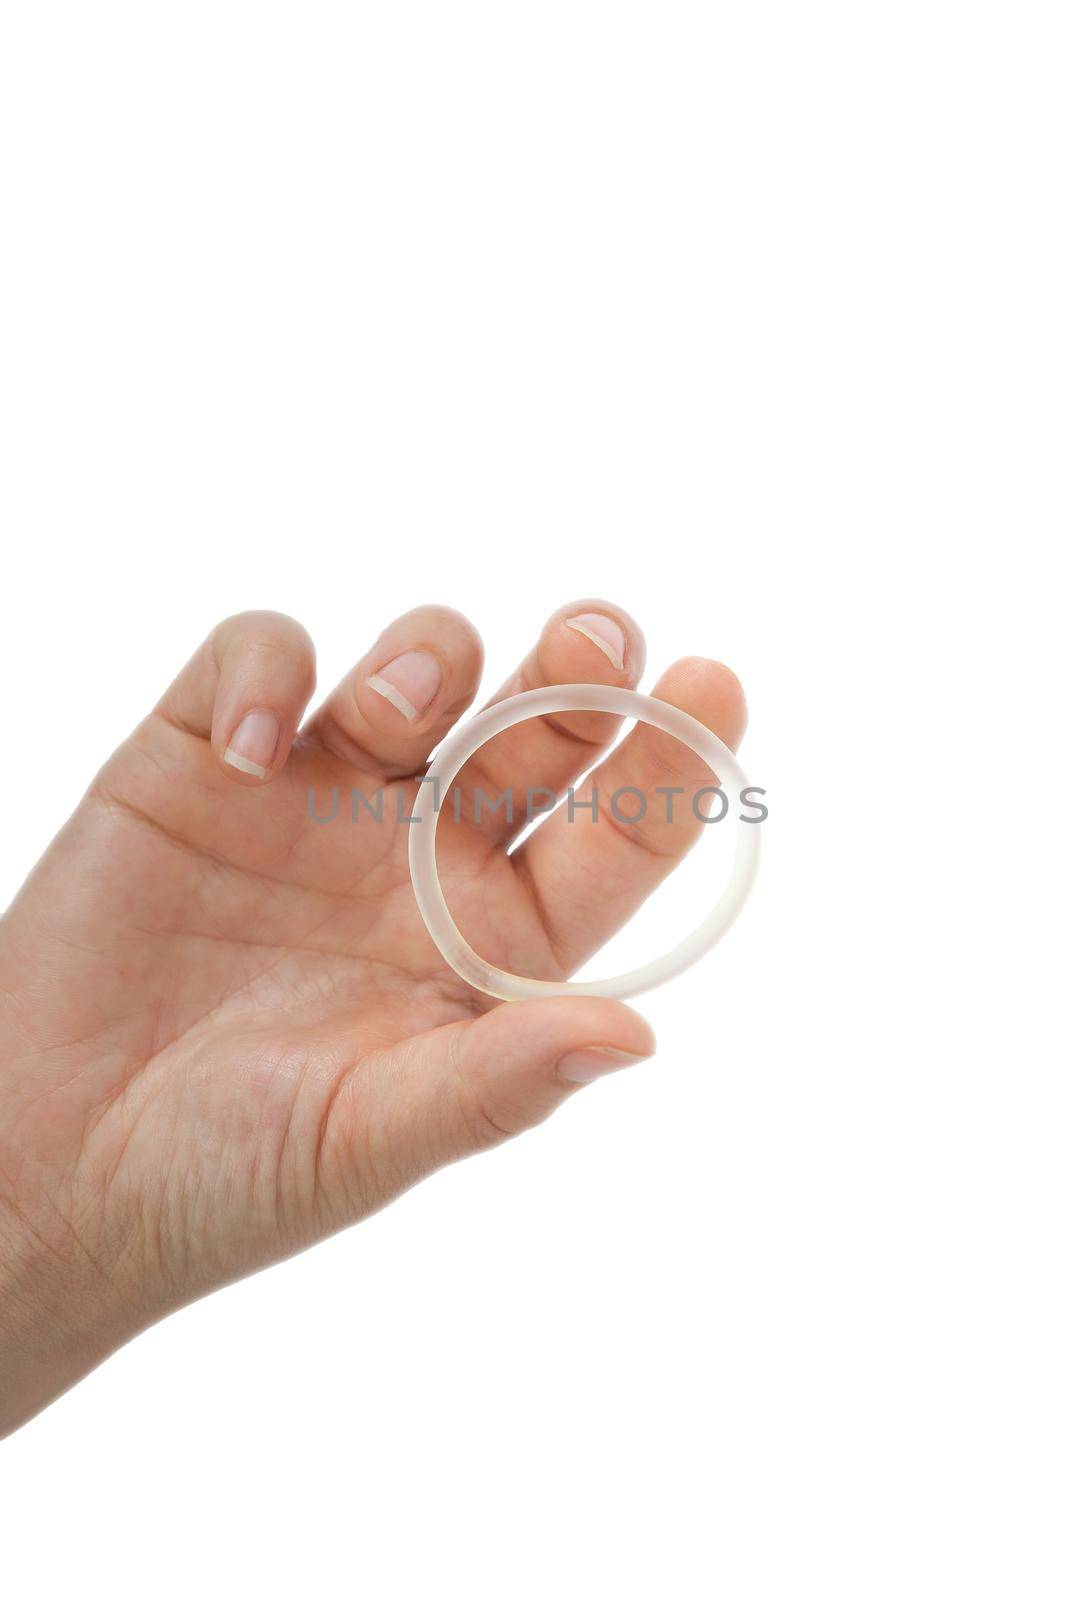 Birth control ,hormone, contraception ring in a womans hand isolated on white background, vaginal ring for contraceptive use with copy space by Annebel146